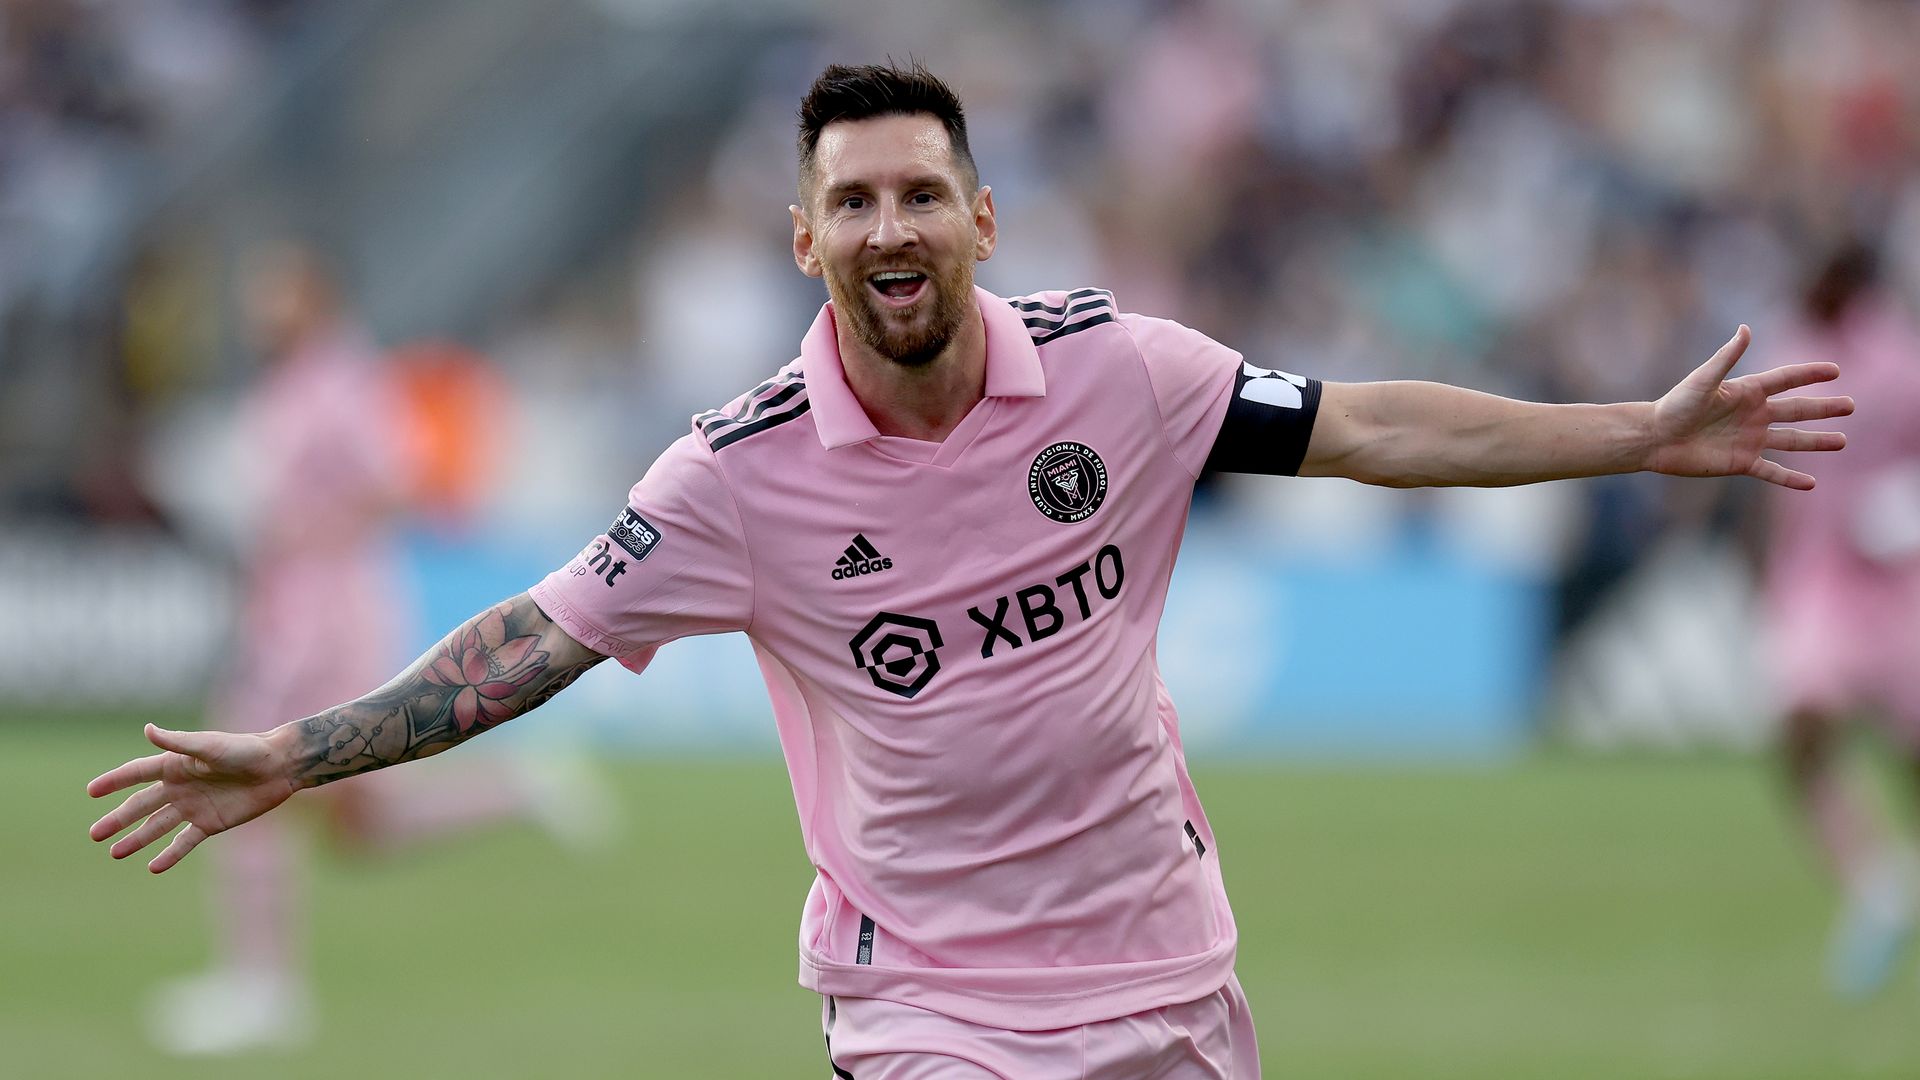 Lionel Messi #10 of Inter Miami CF celebrates after scoring a goal